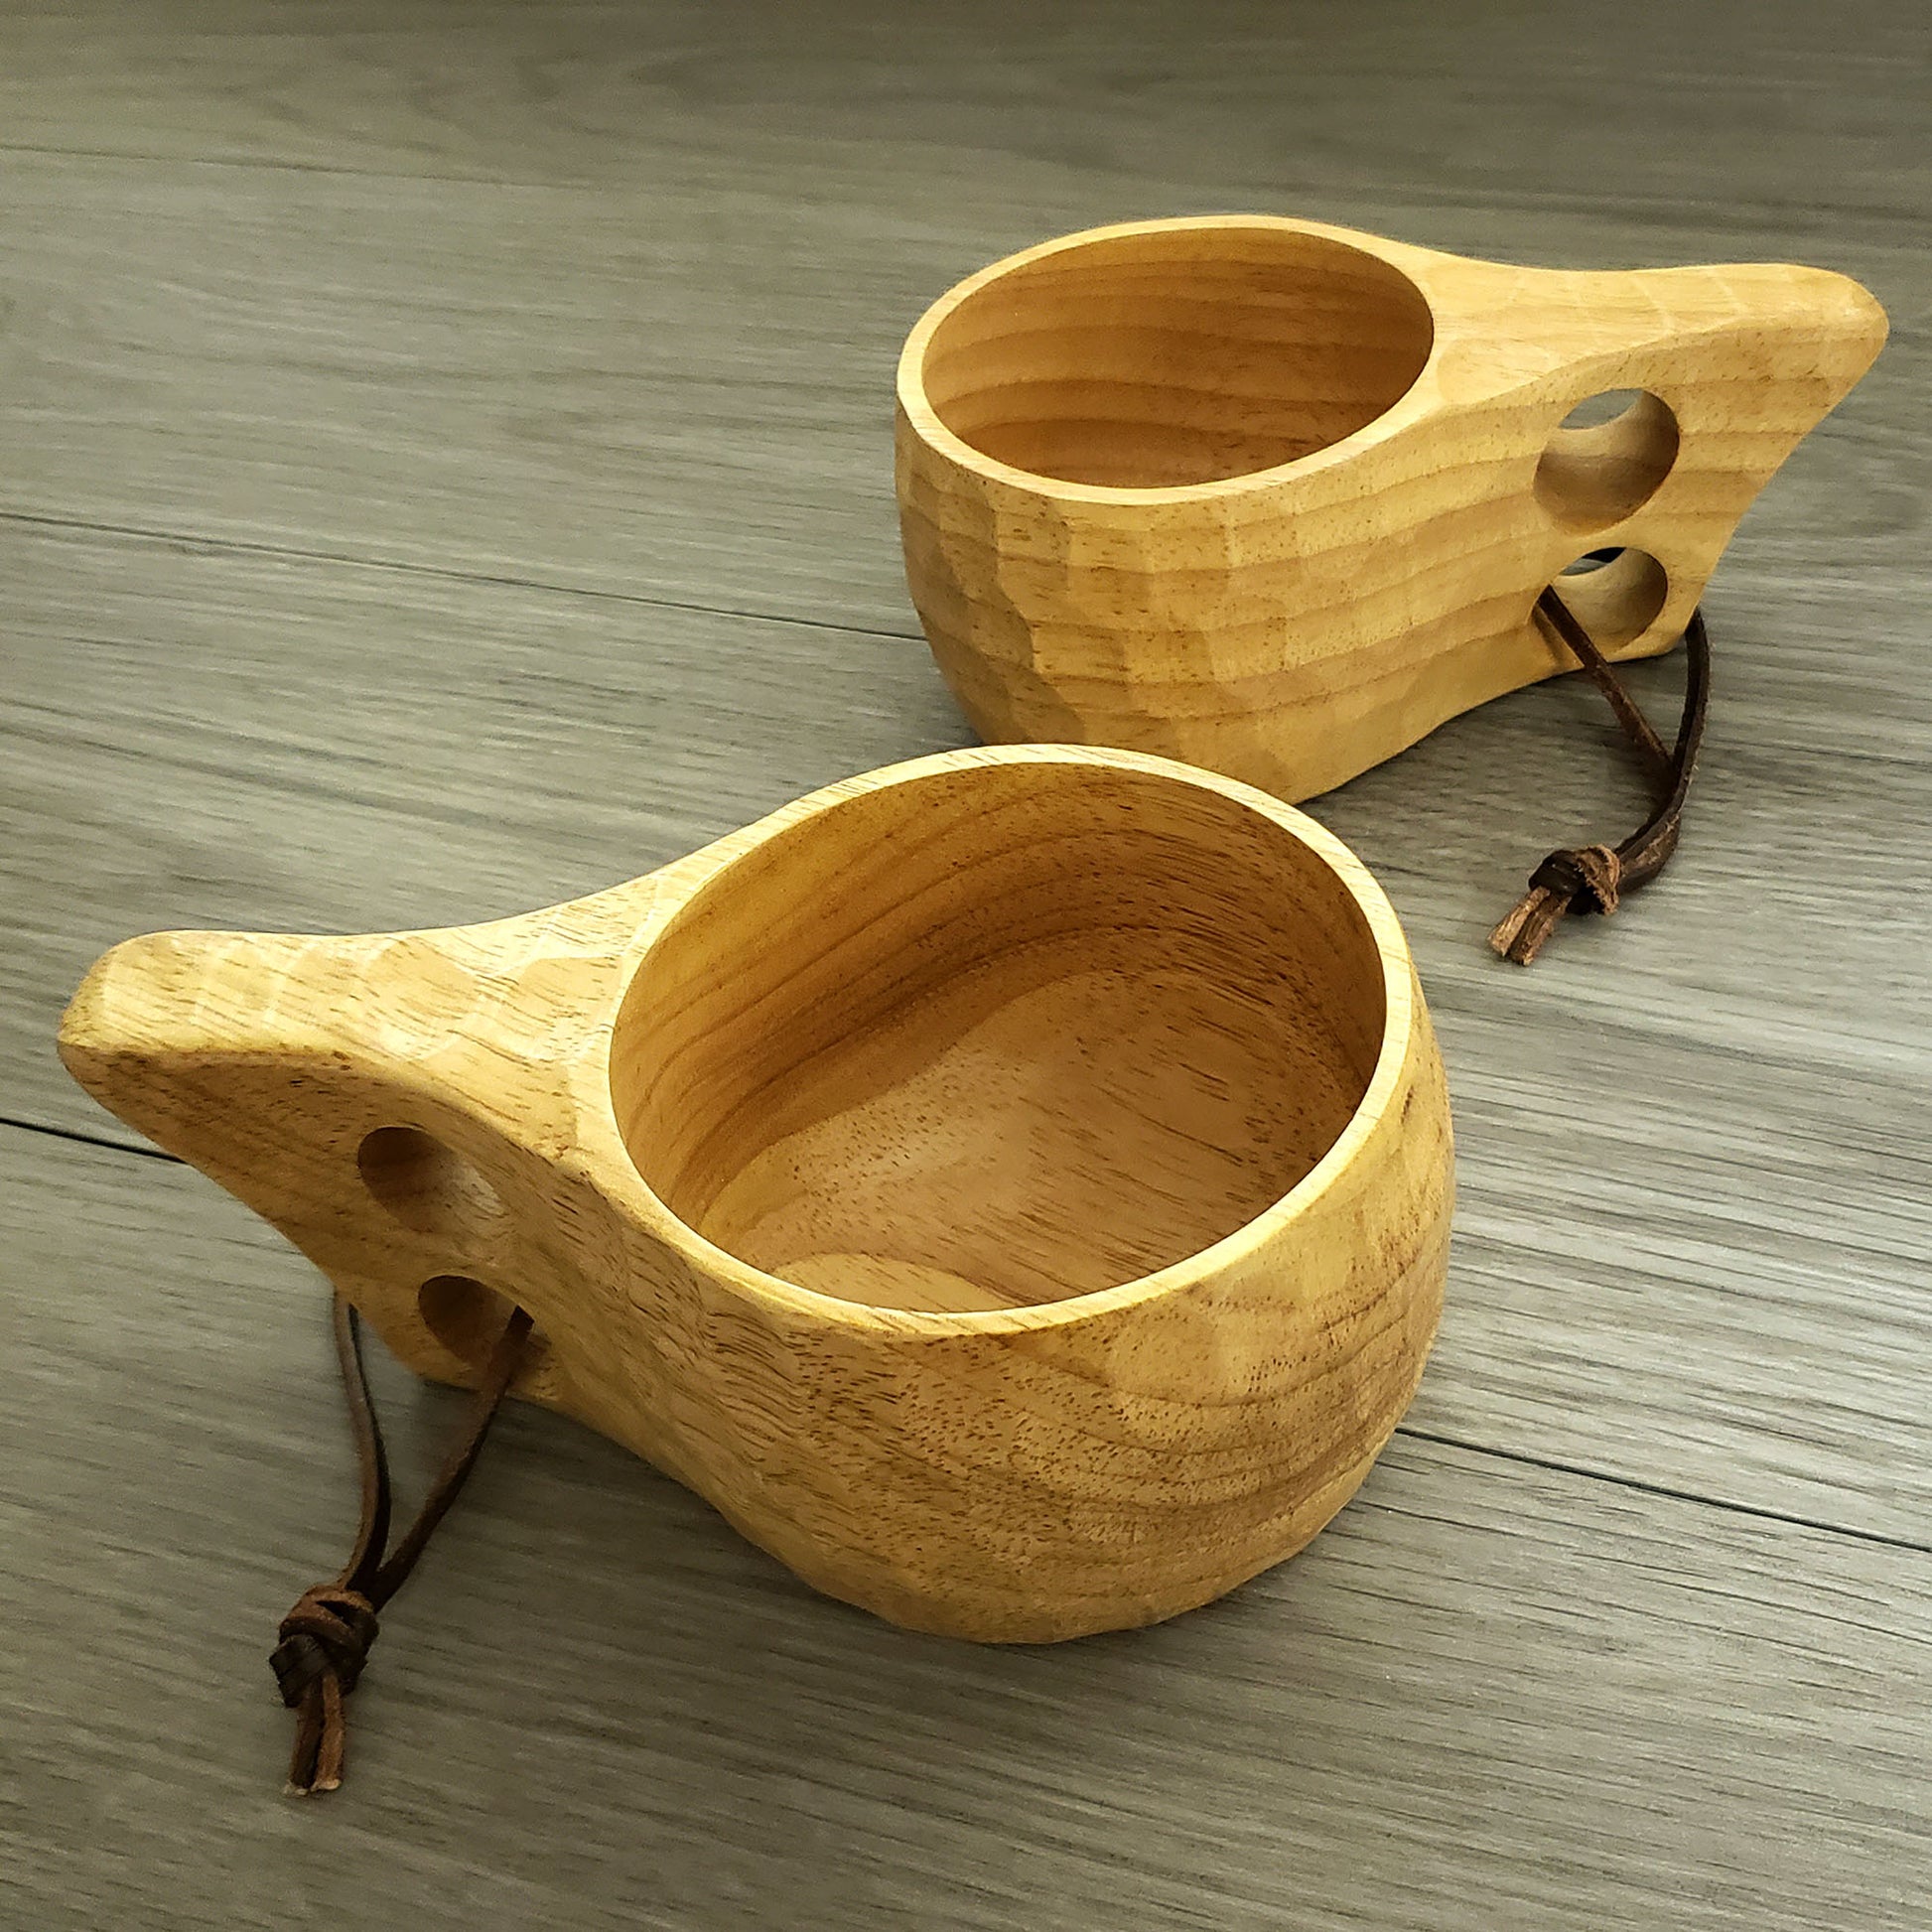 Kuksa Photos, Images and Pictures